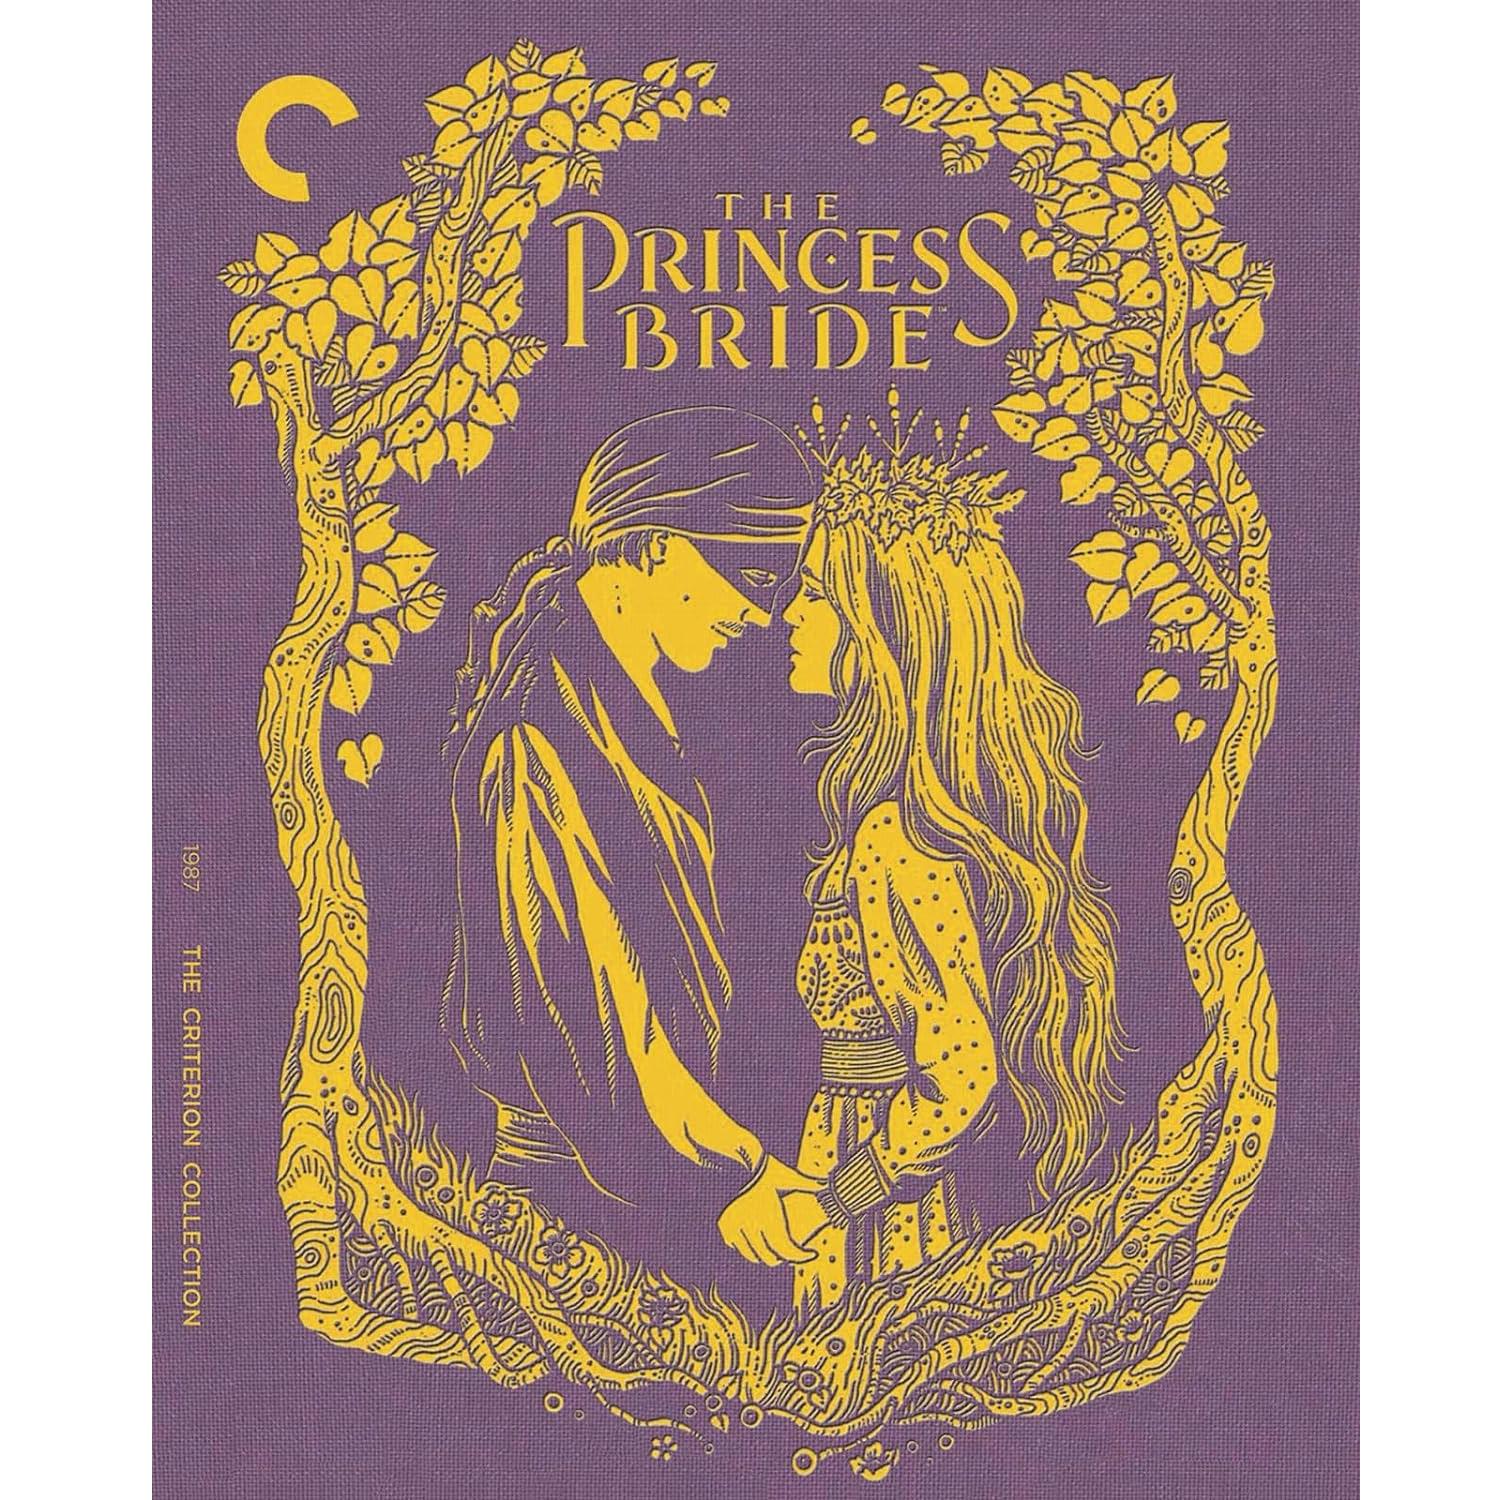 The Princess Bride The Criterion Collection 4K UHD for $24.99